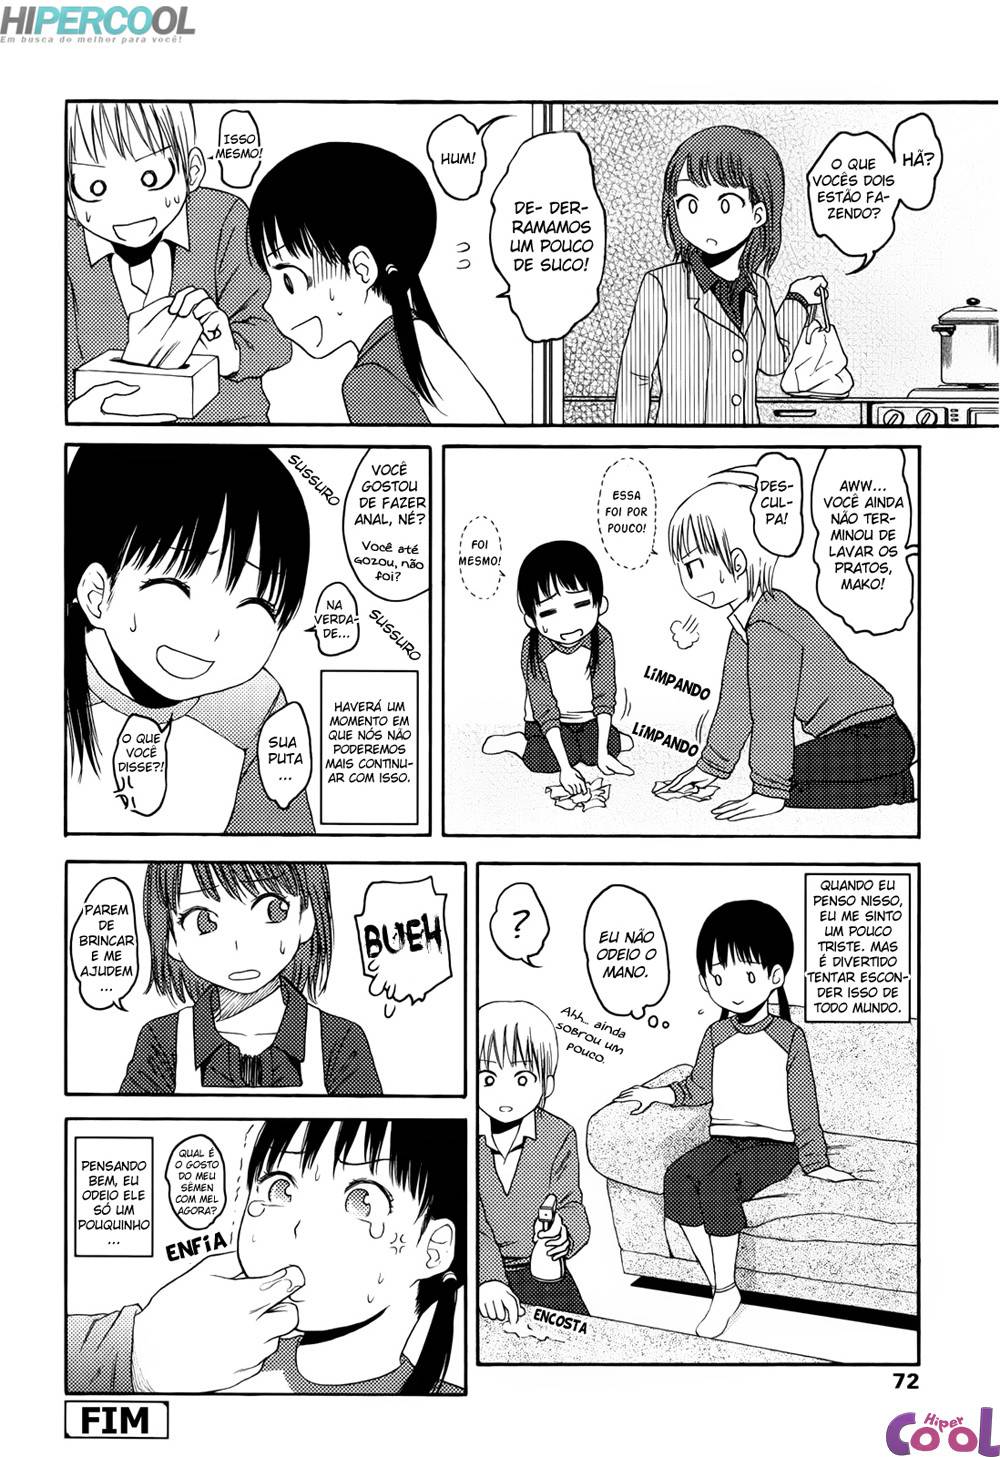 stand-by-me-chapter-03-page-18.jpg